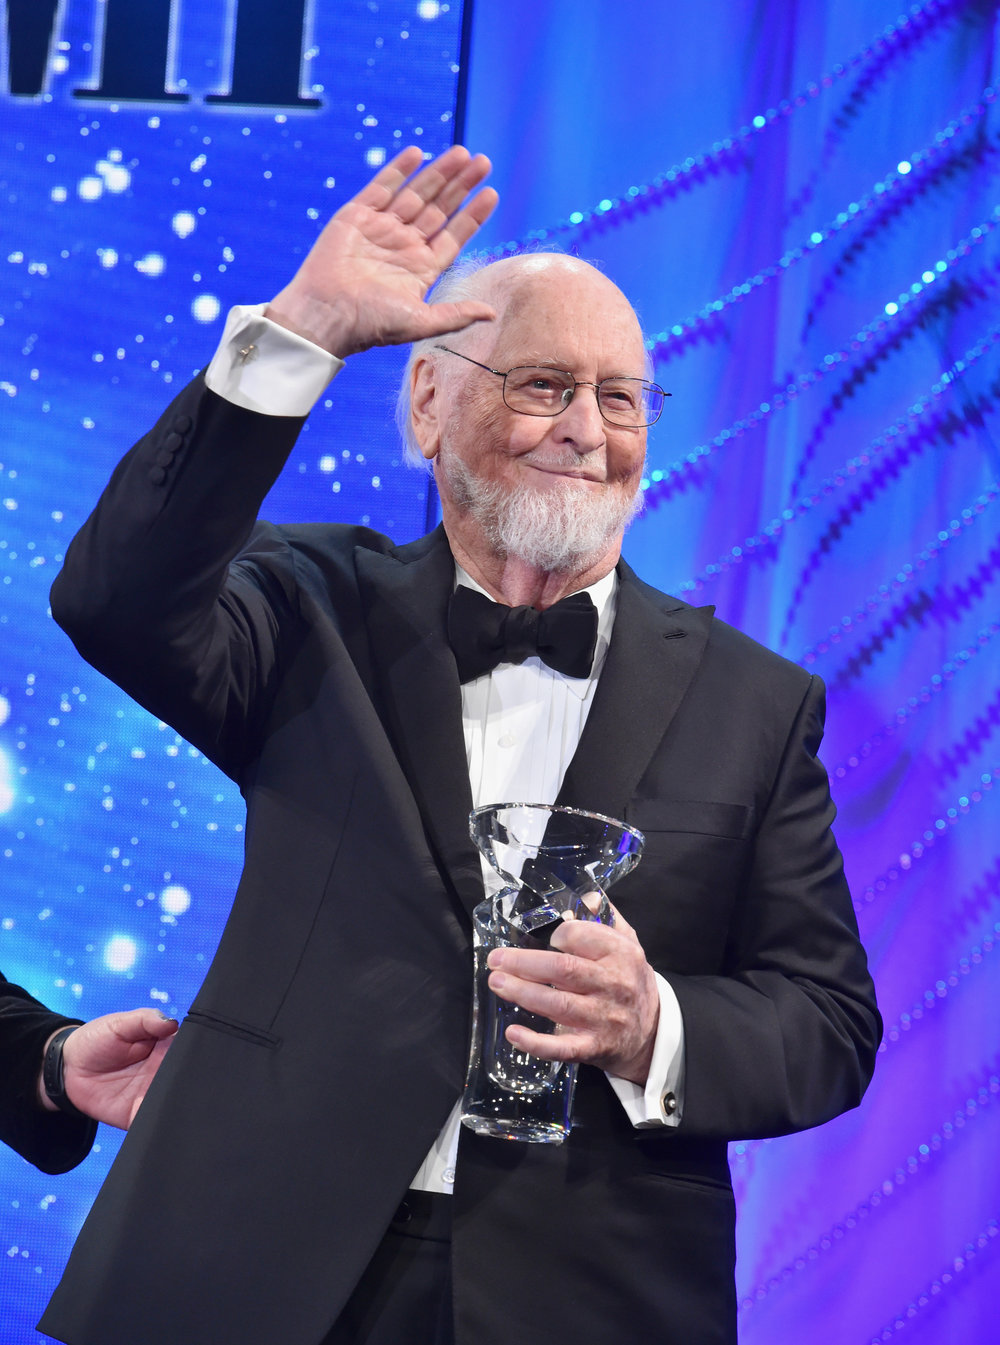  BEVERLY HILLS, CA - MAY 09:  John Williams accepts The John Williams Award onstage during 34th Annual BMI Film, TV & Visual Media Awards at Regent Beverly Wilshire Hotel on May 9, 2018 in Beverly Hills, California.  (Photo by Lester Cohen/Getty Imag